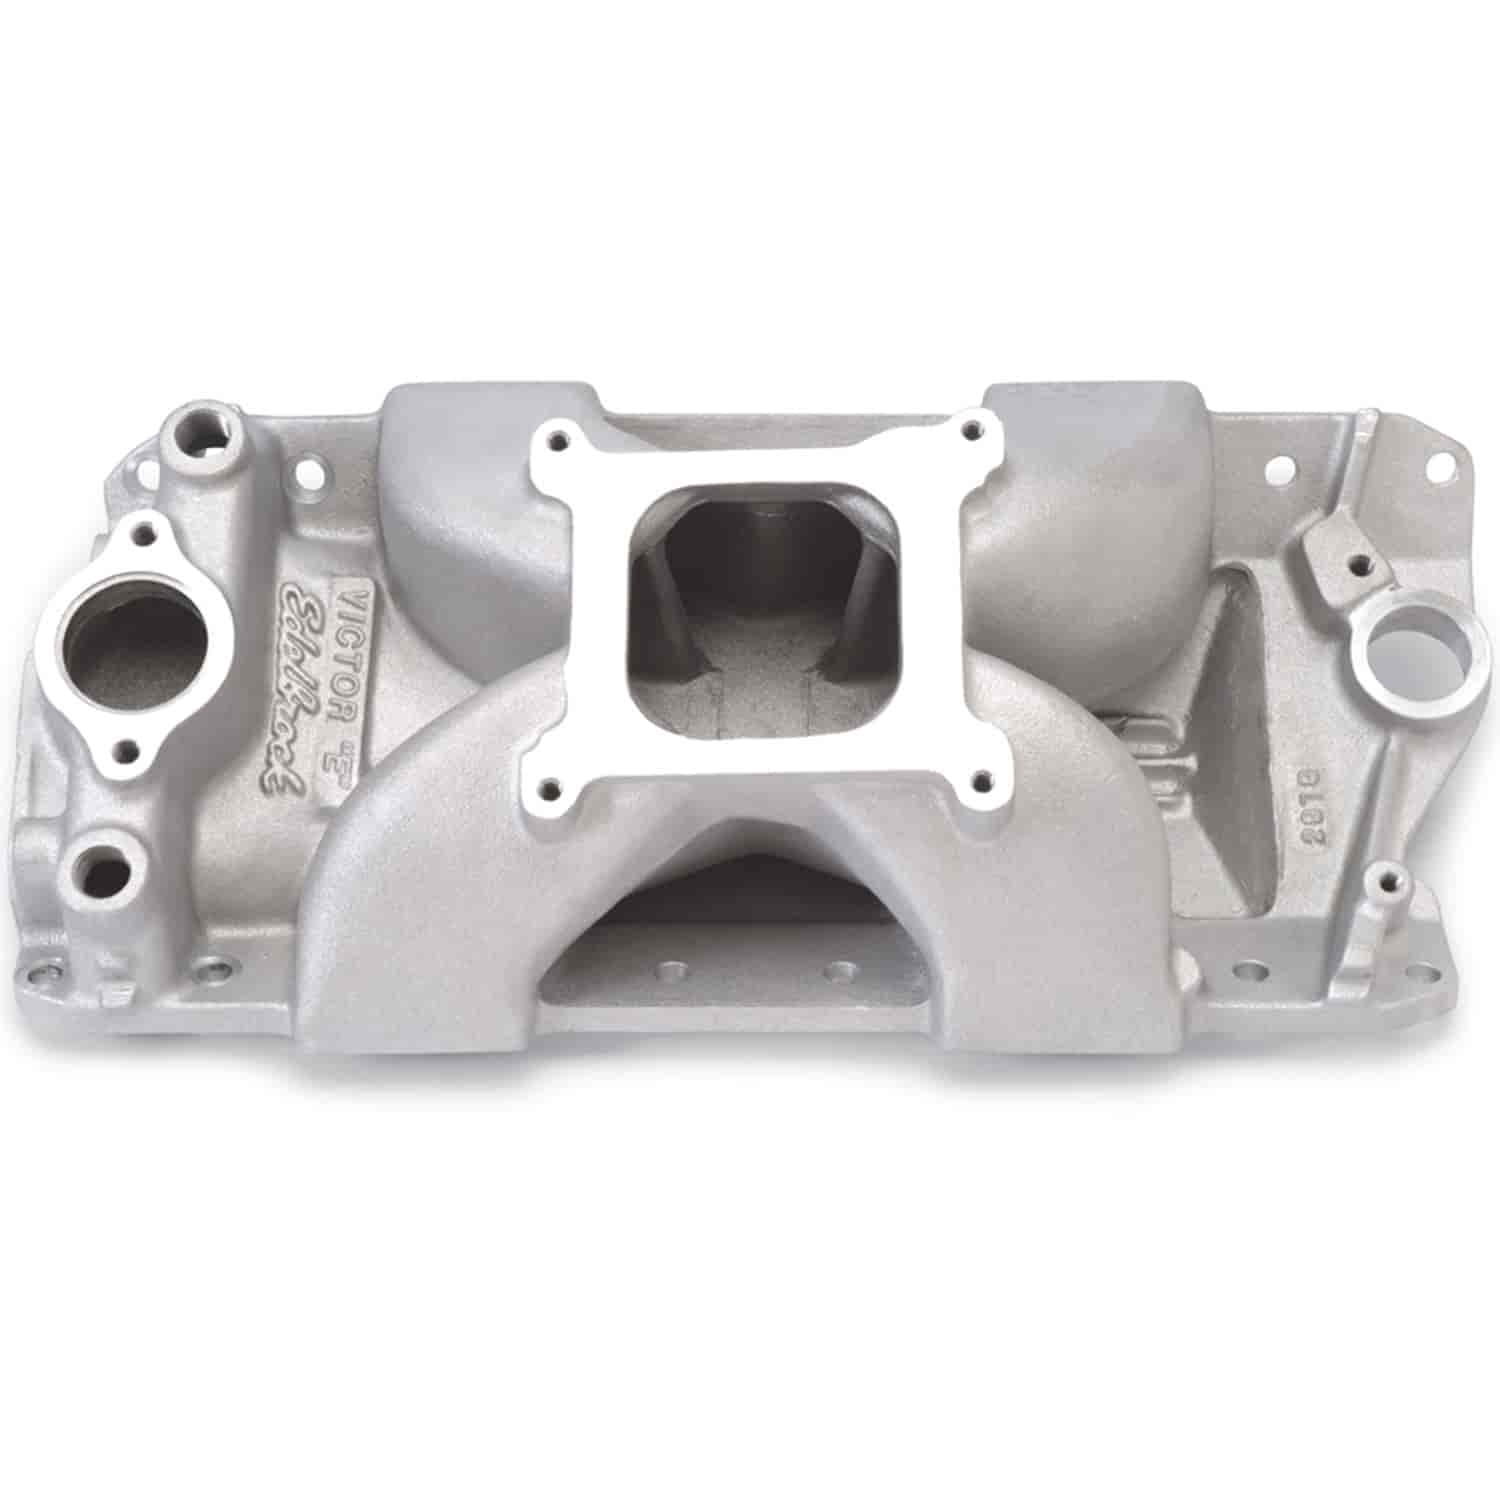 Victor E 23° Intake Manifold for Small Block Chevy